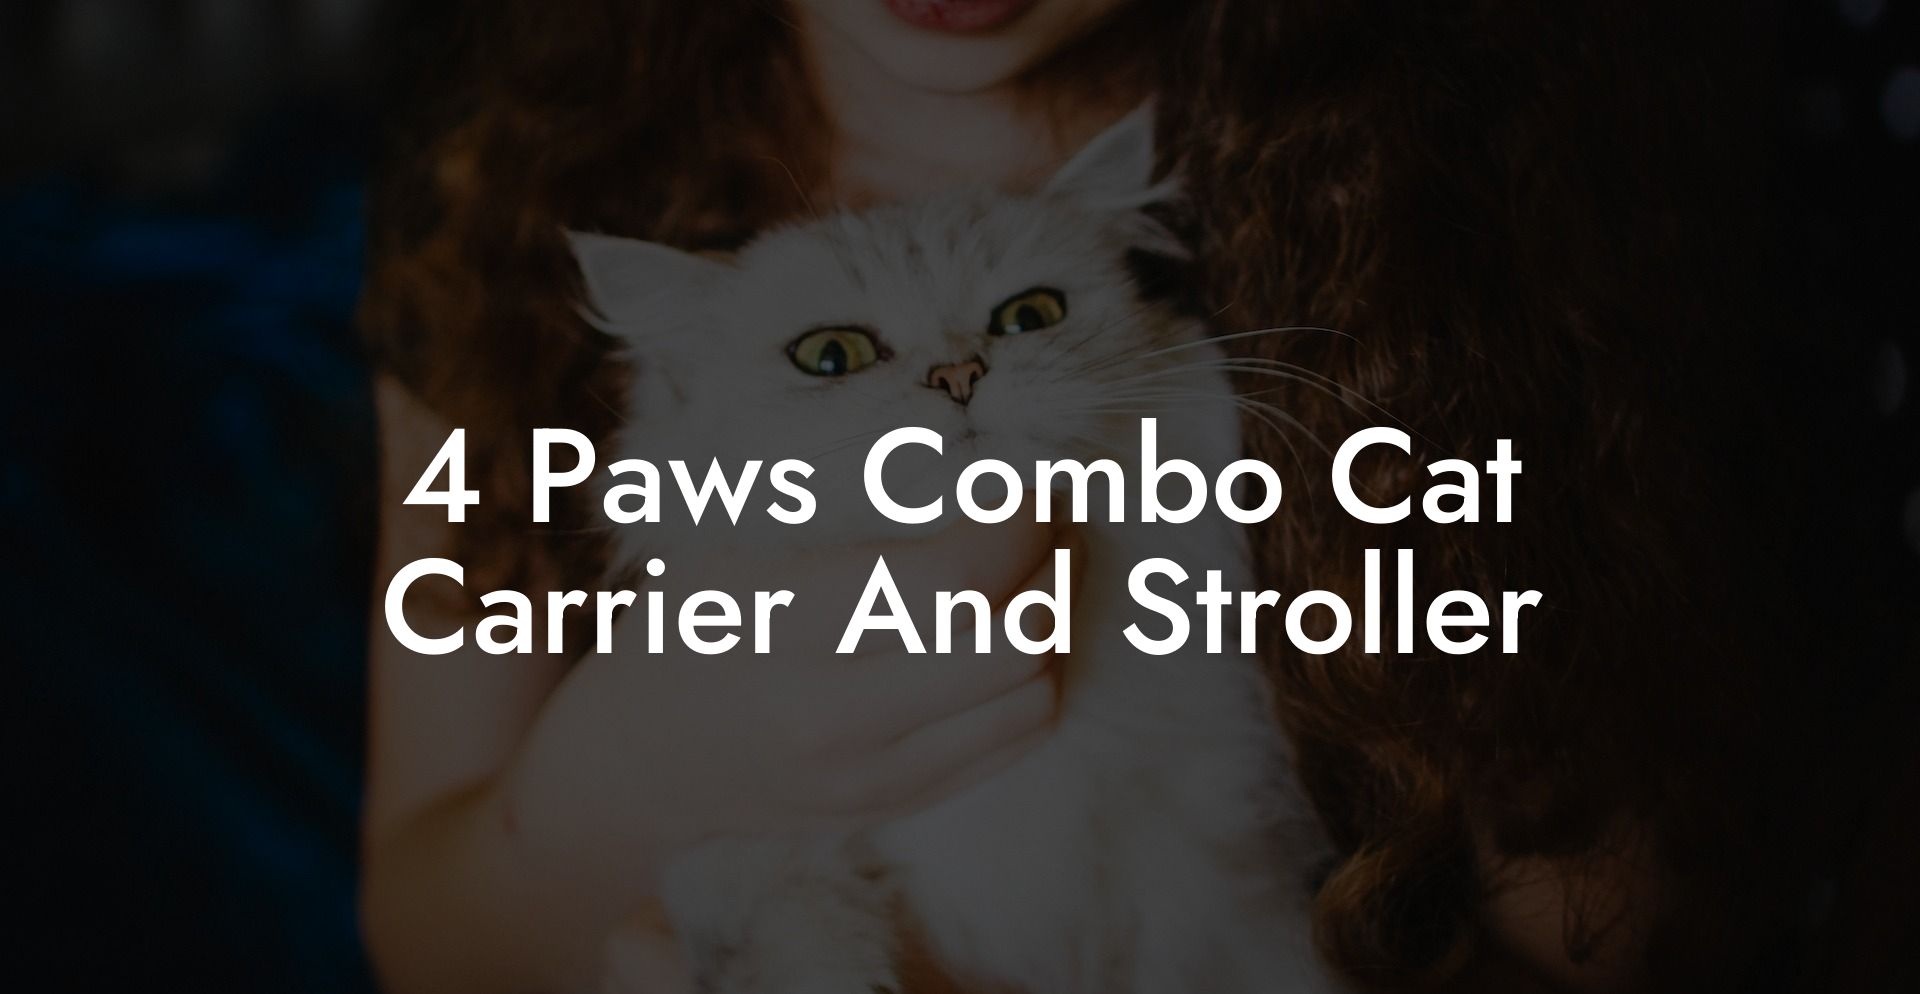 4 Paws Combo Cat Carrier And Stroller